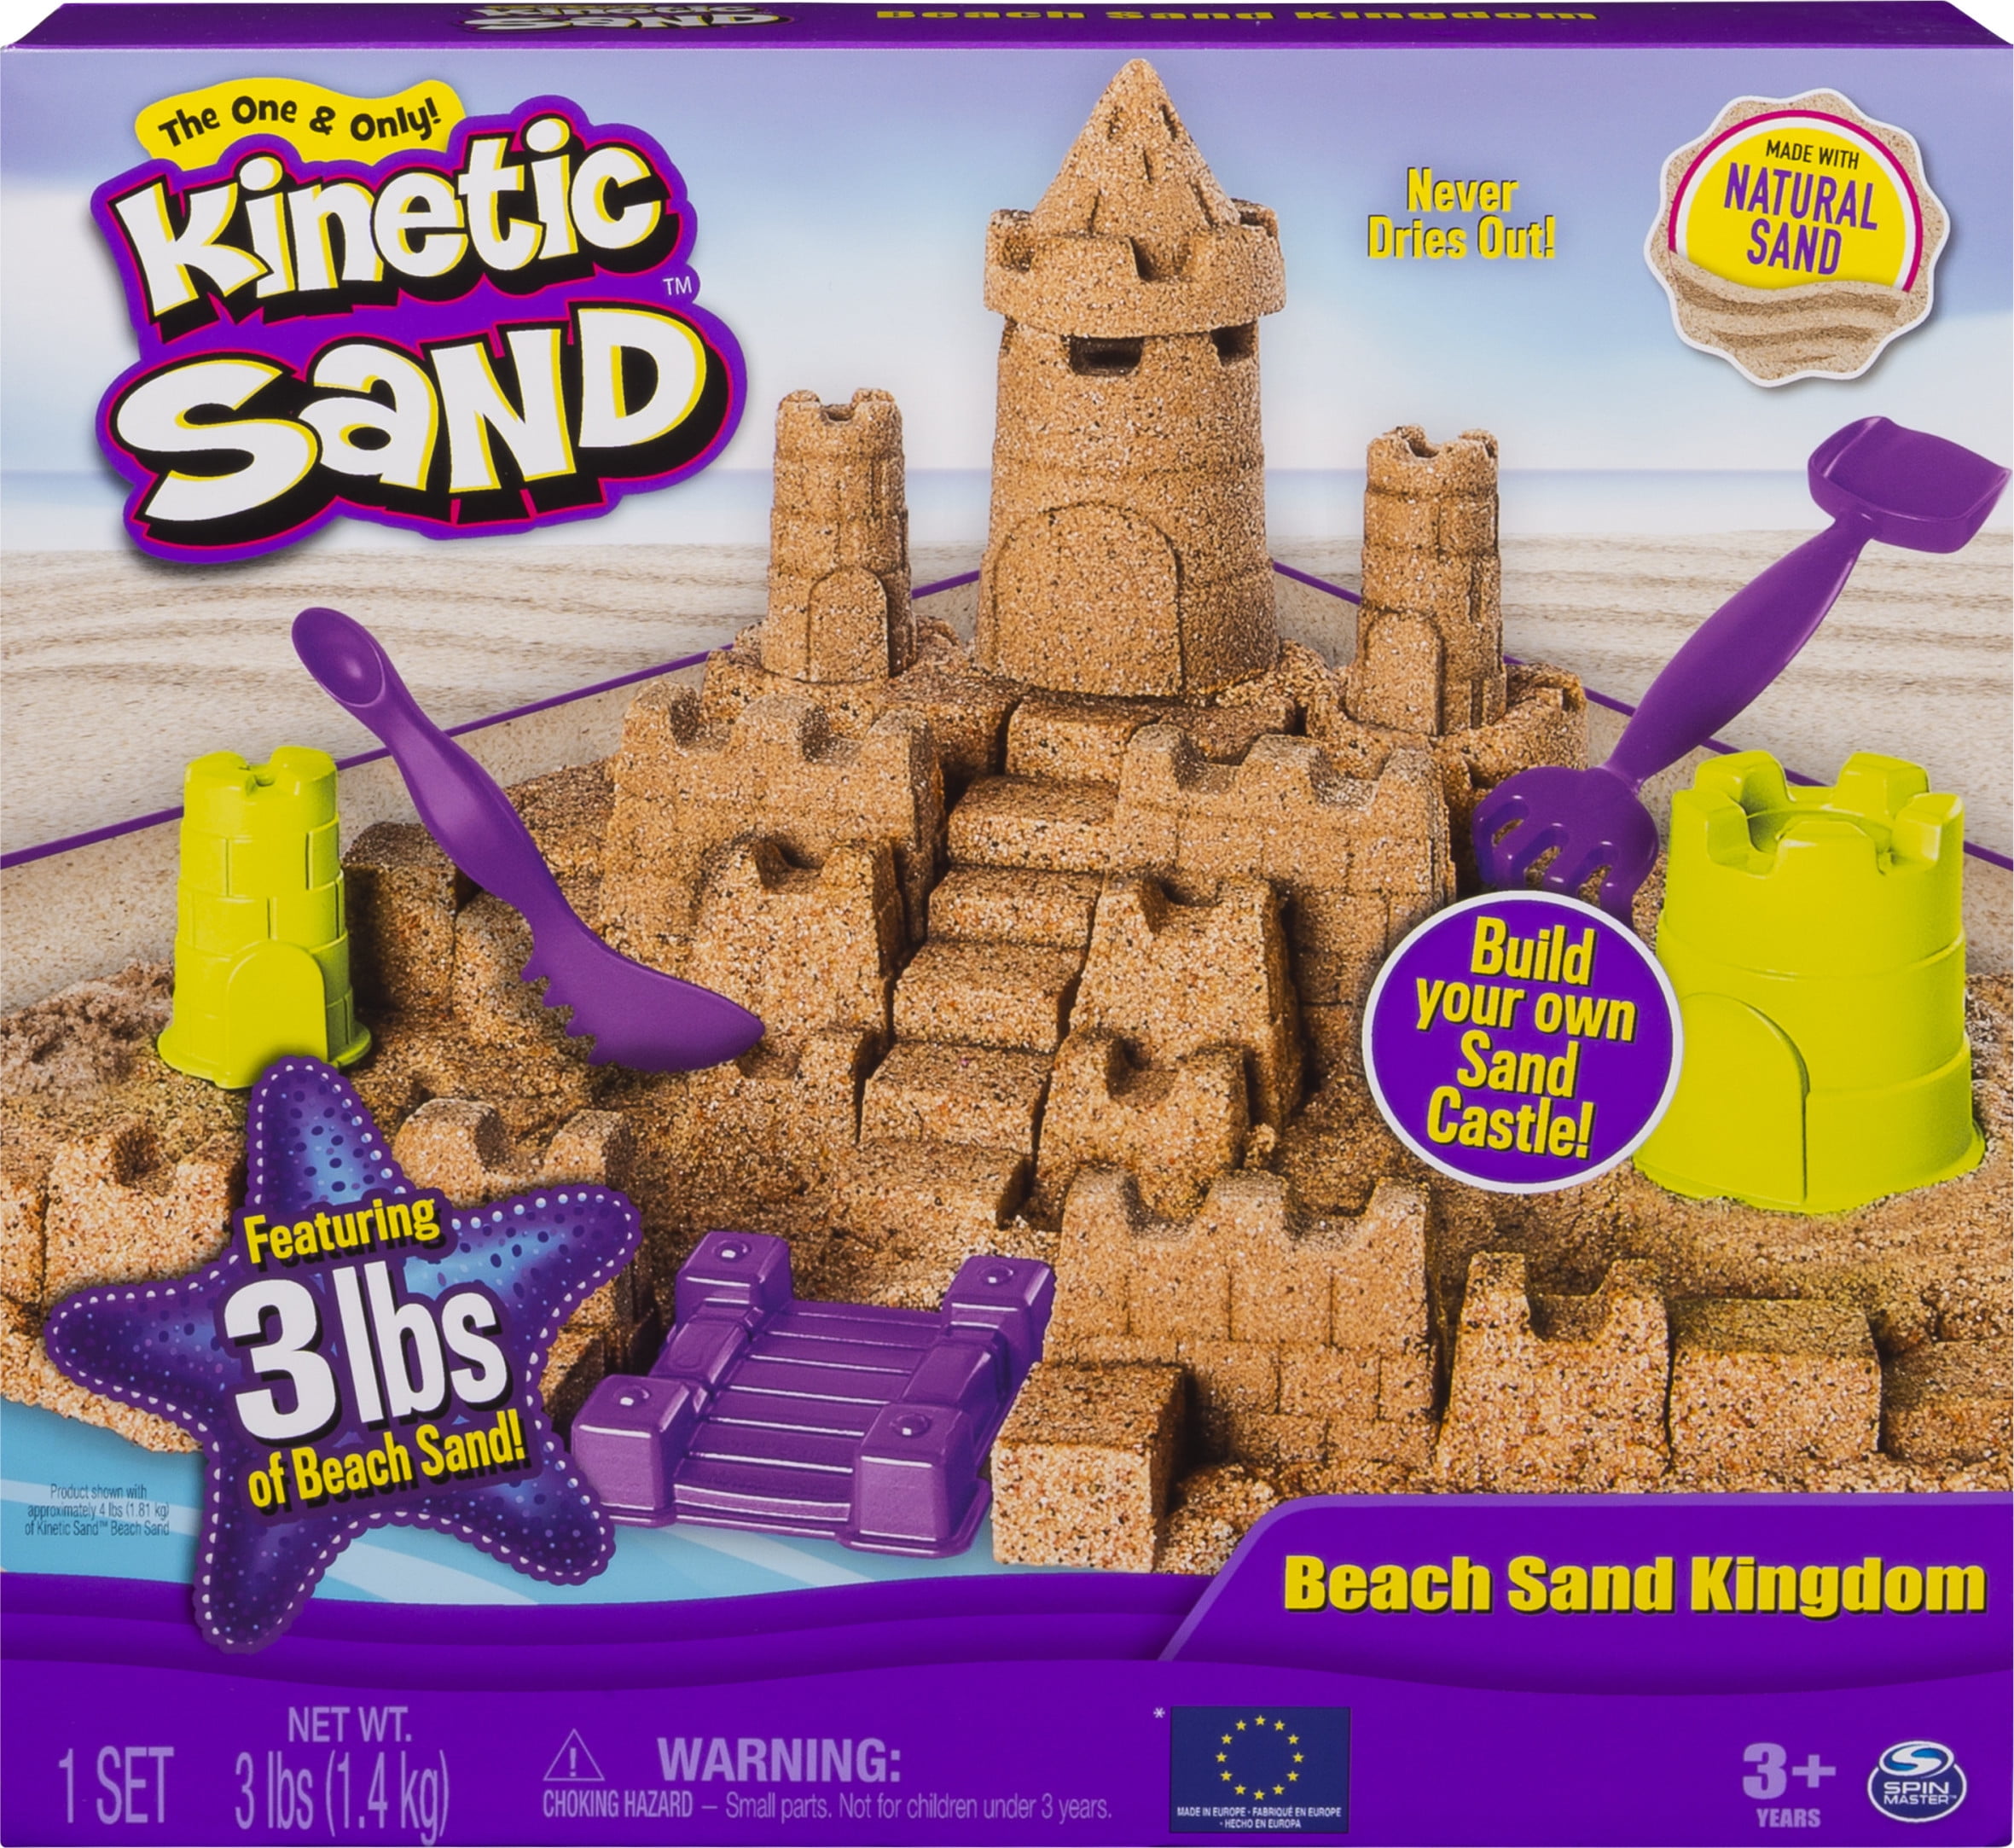 Bring The Beach to Your Home with Mess-Free Magic Sand Moldable Sand Art & Work On Fine Motor Skills walla Play Sand 5 lbs. | Pink Play Sand for Kids Great Kinetic Sensory Toy for Creating Fun 